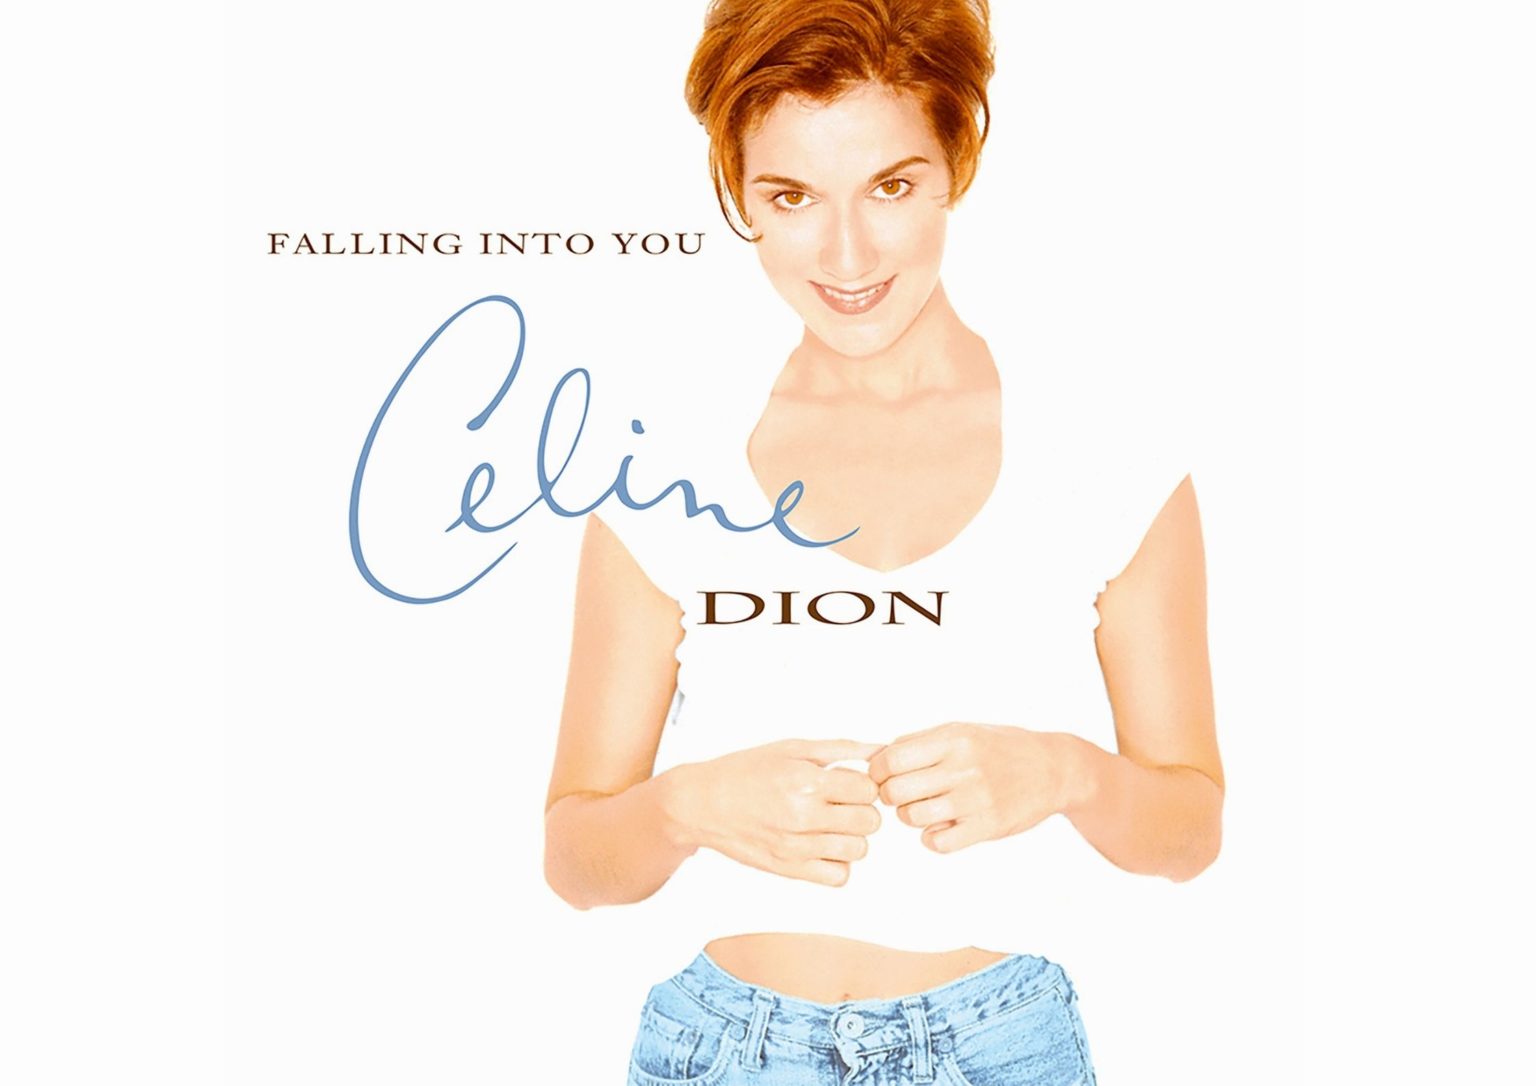 Celine Dion’s album ‘Falling Into You’ turns 25 - Mellow 94.7